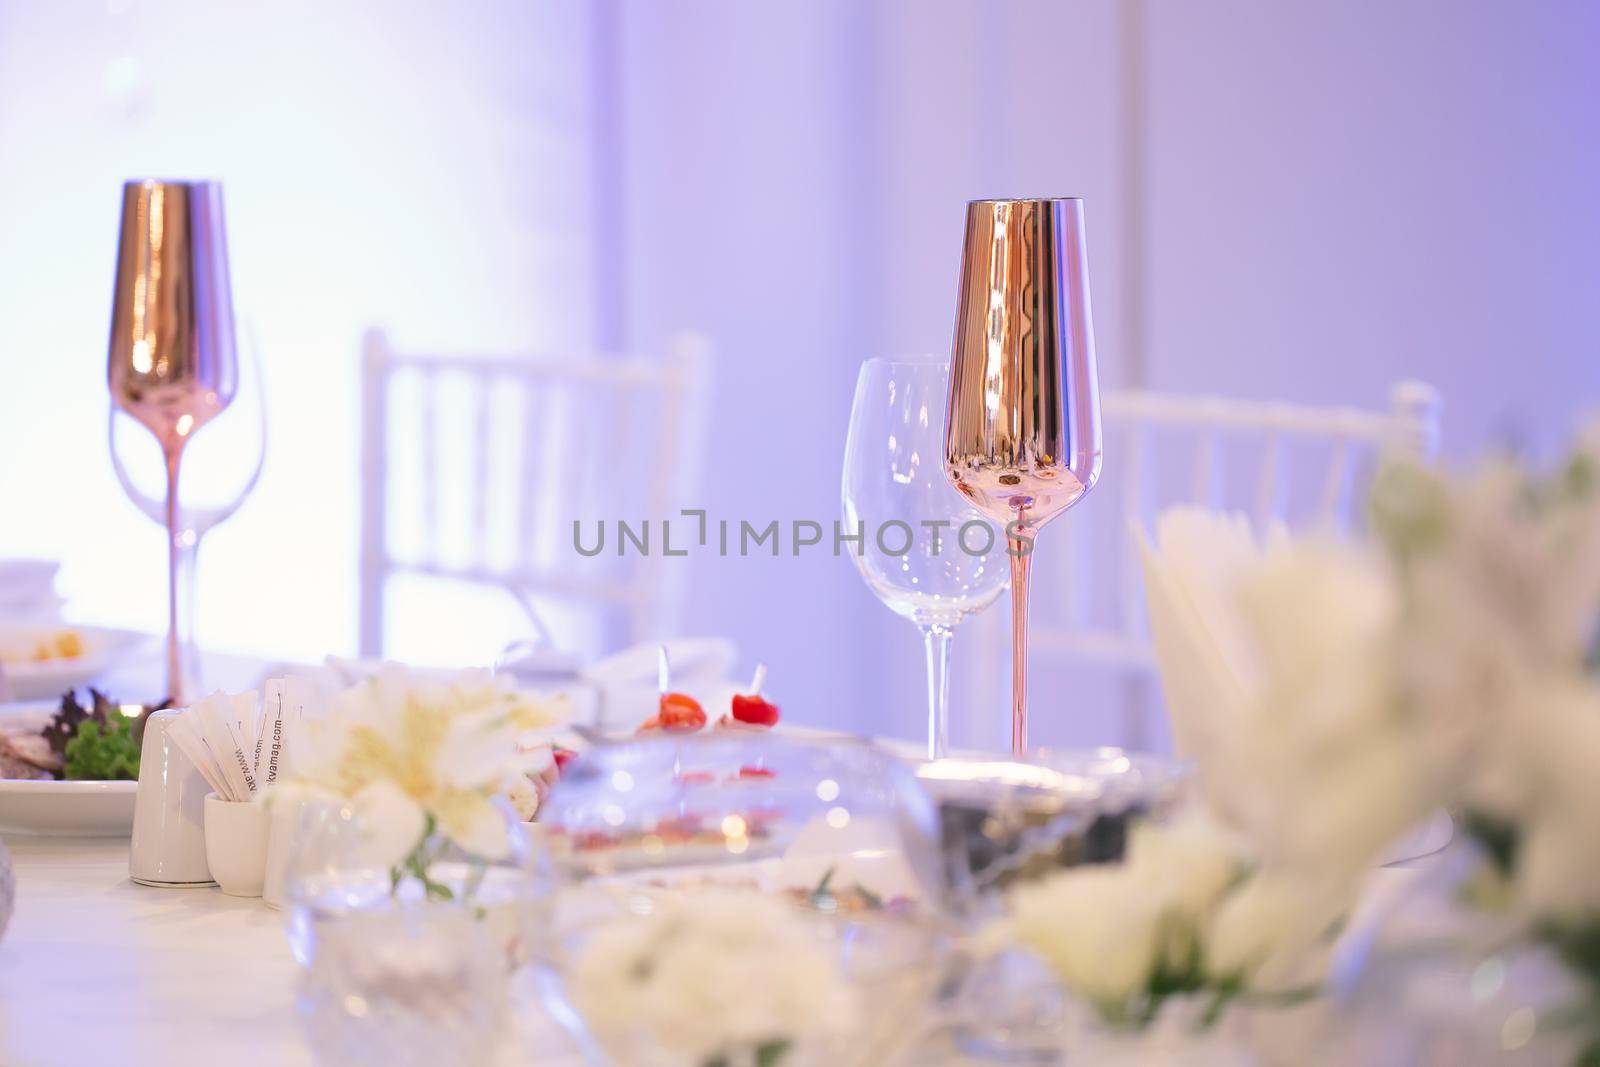 Table at a luxury wedding reception. Beautiful flowers on the table. Serving dishes, glass glasses. by StudioPeace